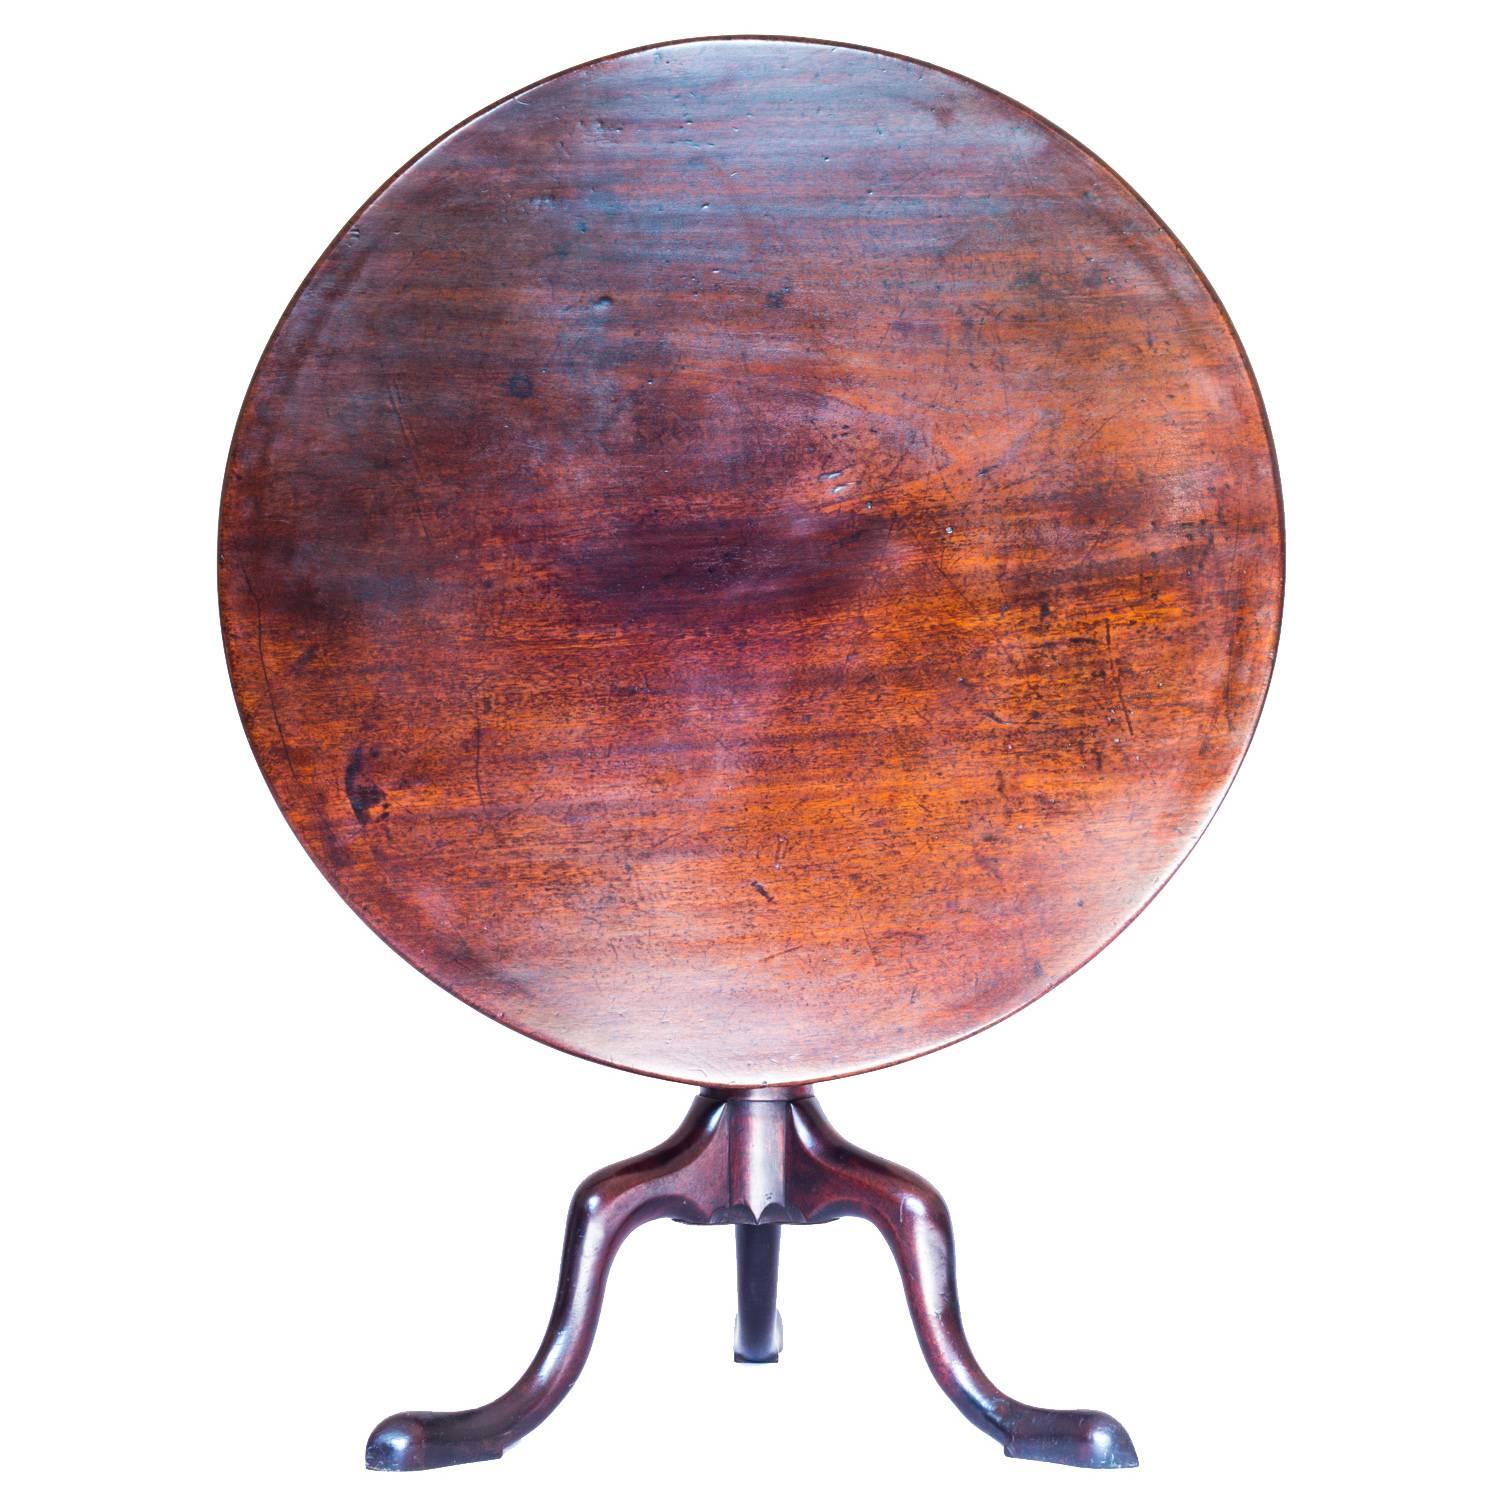 A superb George II period occasional tilt-top table, in heavy and dense Cuban mahogany,

English, circa 1750.

The round solid top, cut from a single trunk of dense and well grained Cuban mahogany, above a tapering standard having a lower spiral